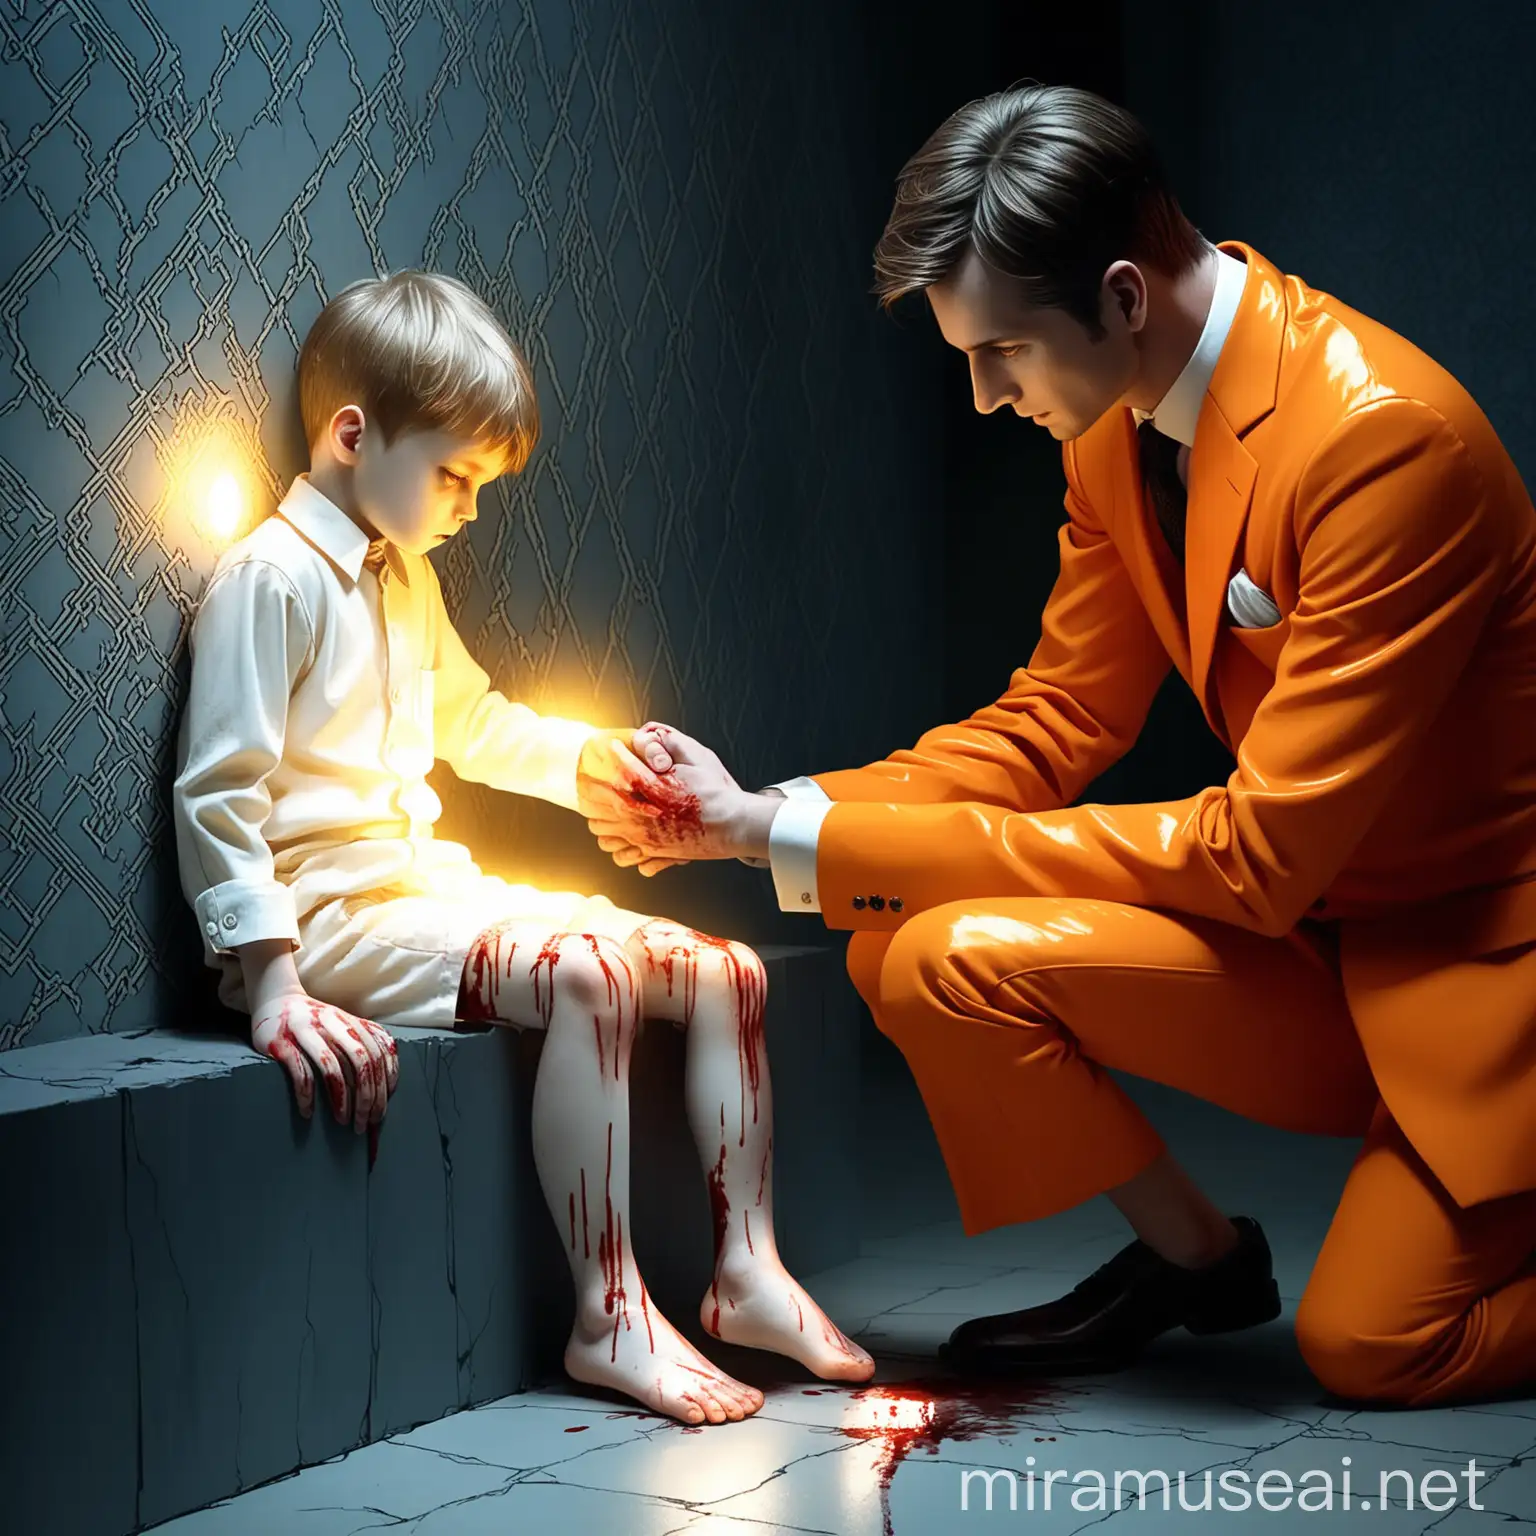 The background is a secret room with 'enochian patterns' on it.
The eight-year-old injured his knee and is bleeding profusely.
A handsome man in his 20s in an orange suit puts his hand on the knee of an eight-year-old child.
An intense white glow emanates from the knee.